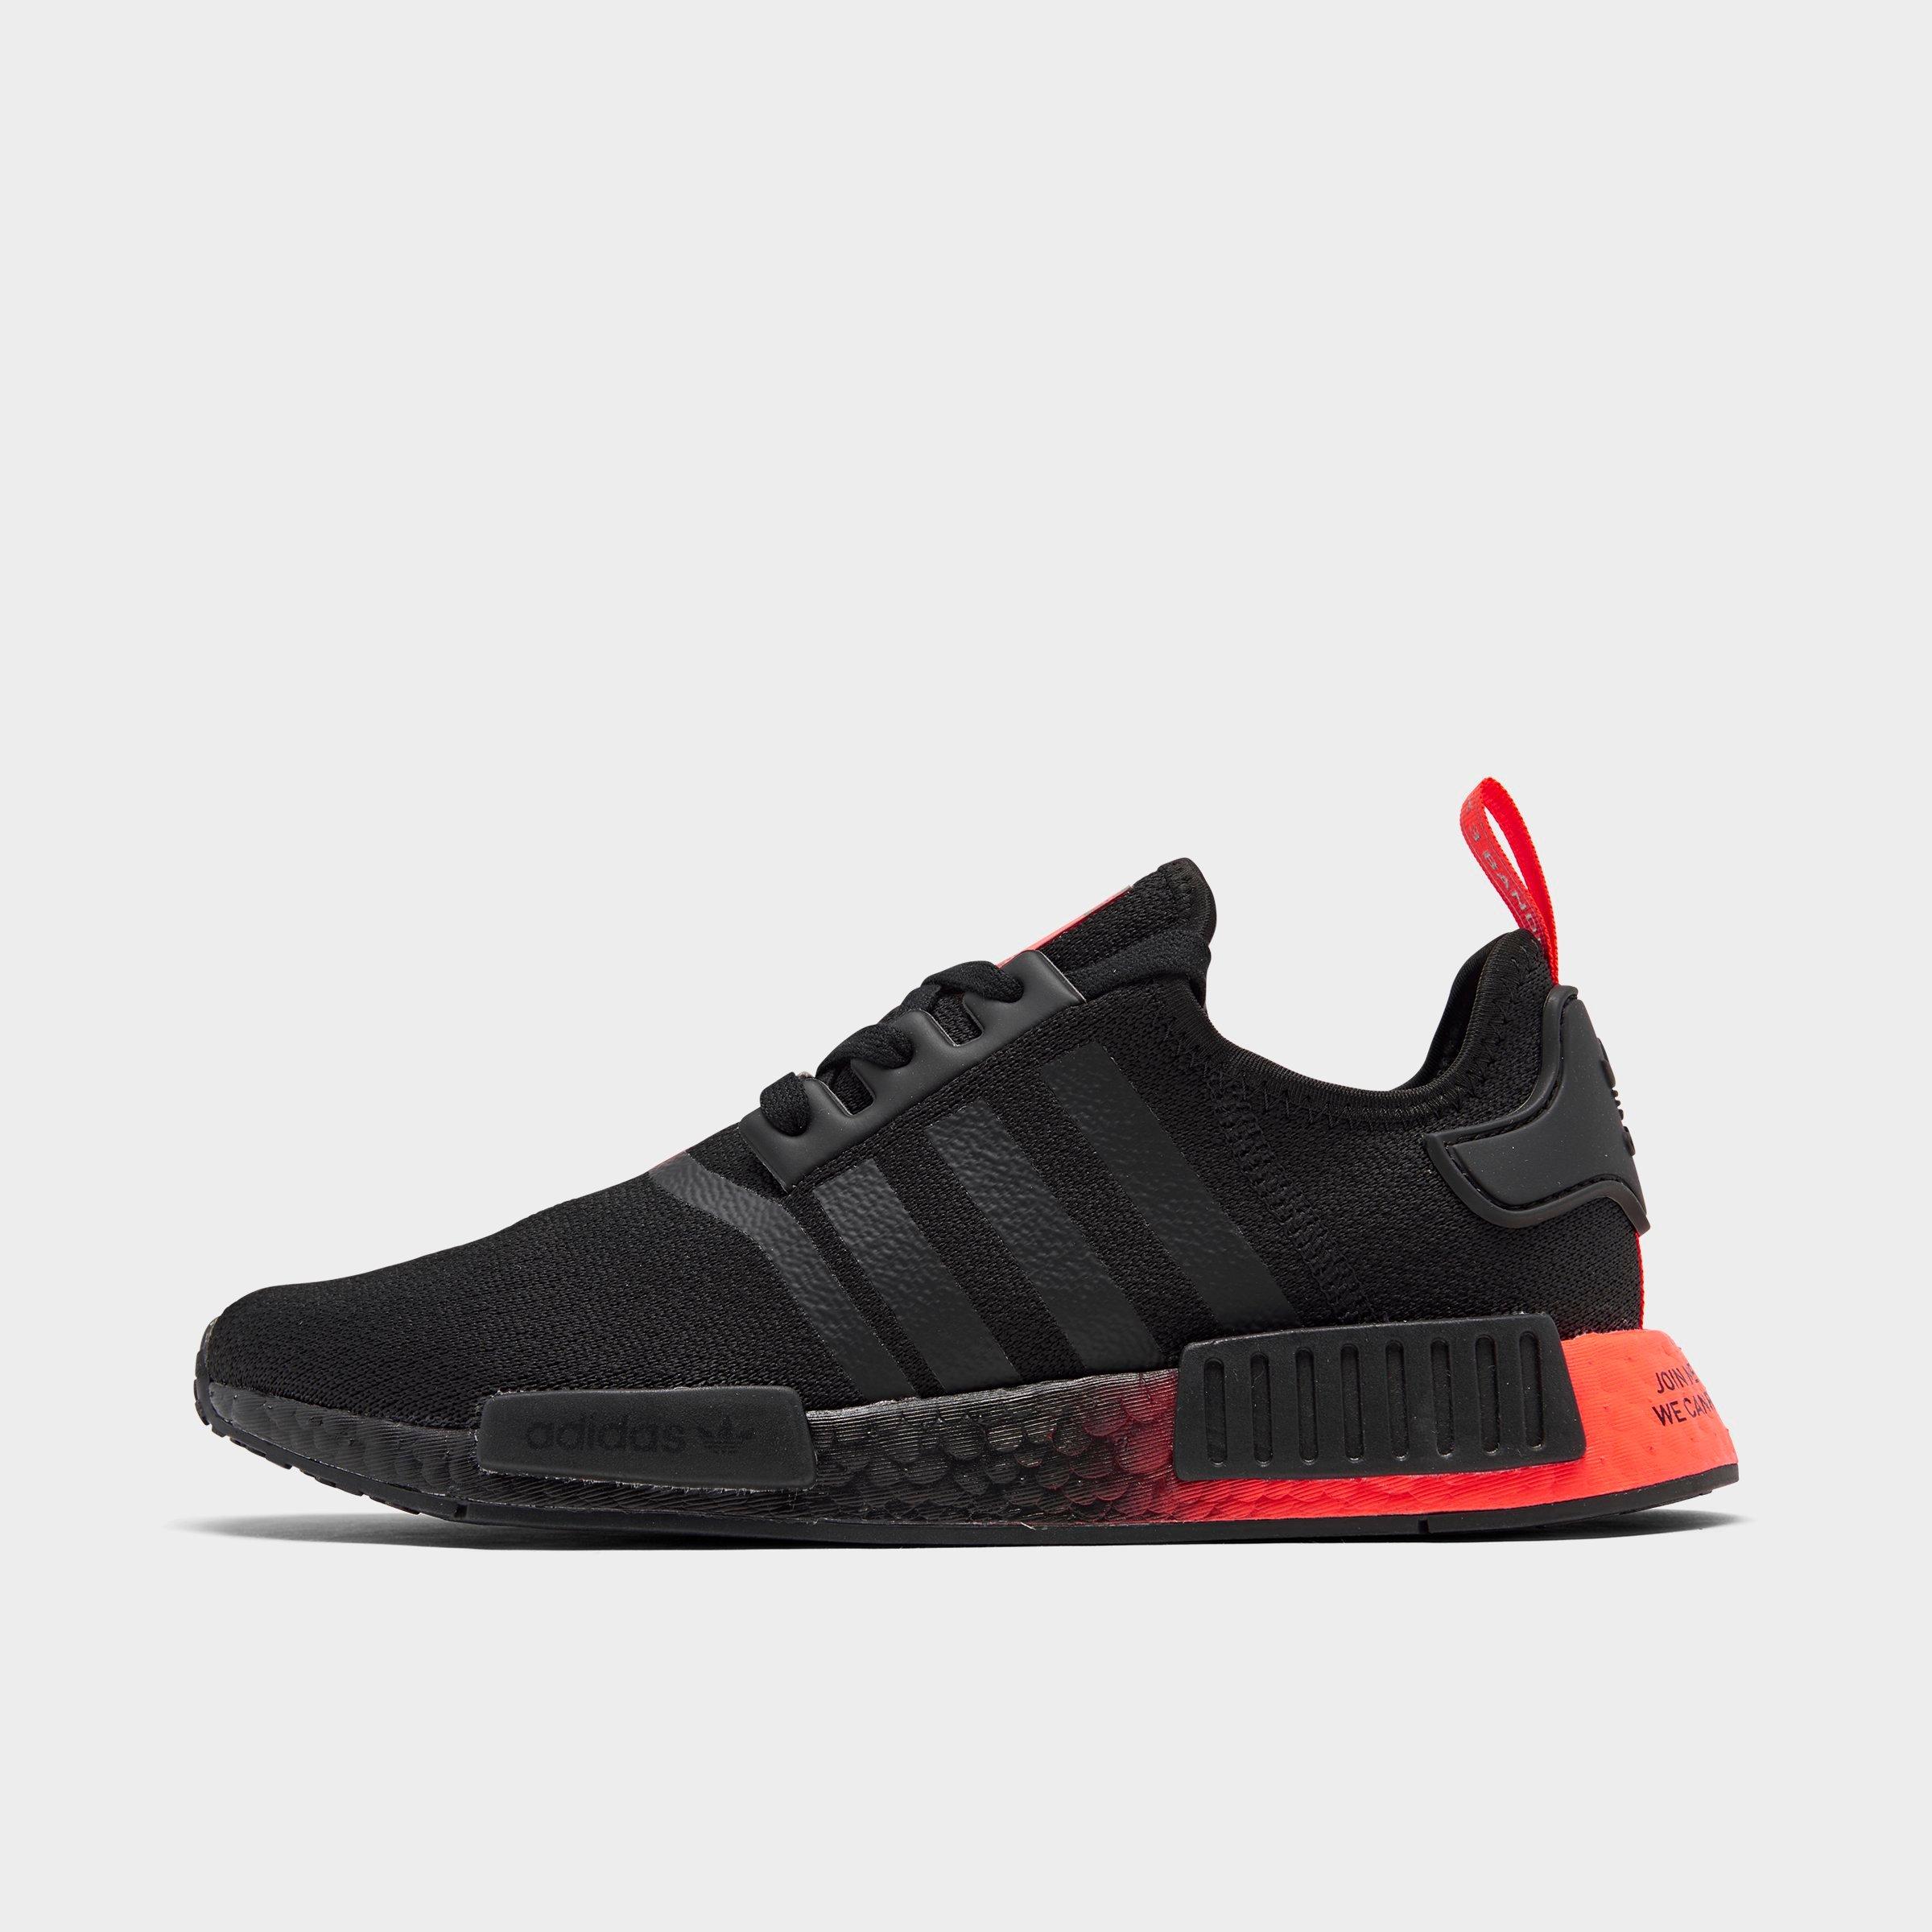 Cheap NMD R1 Star Wars, Cheapest Adidas NMD R1 Star Wars Outlet 2021